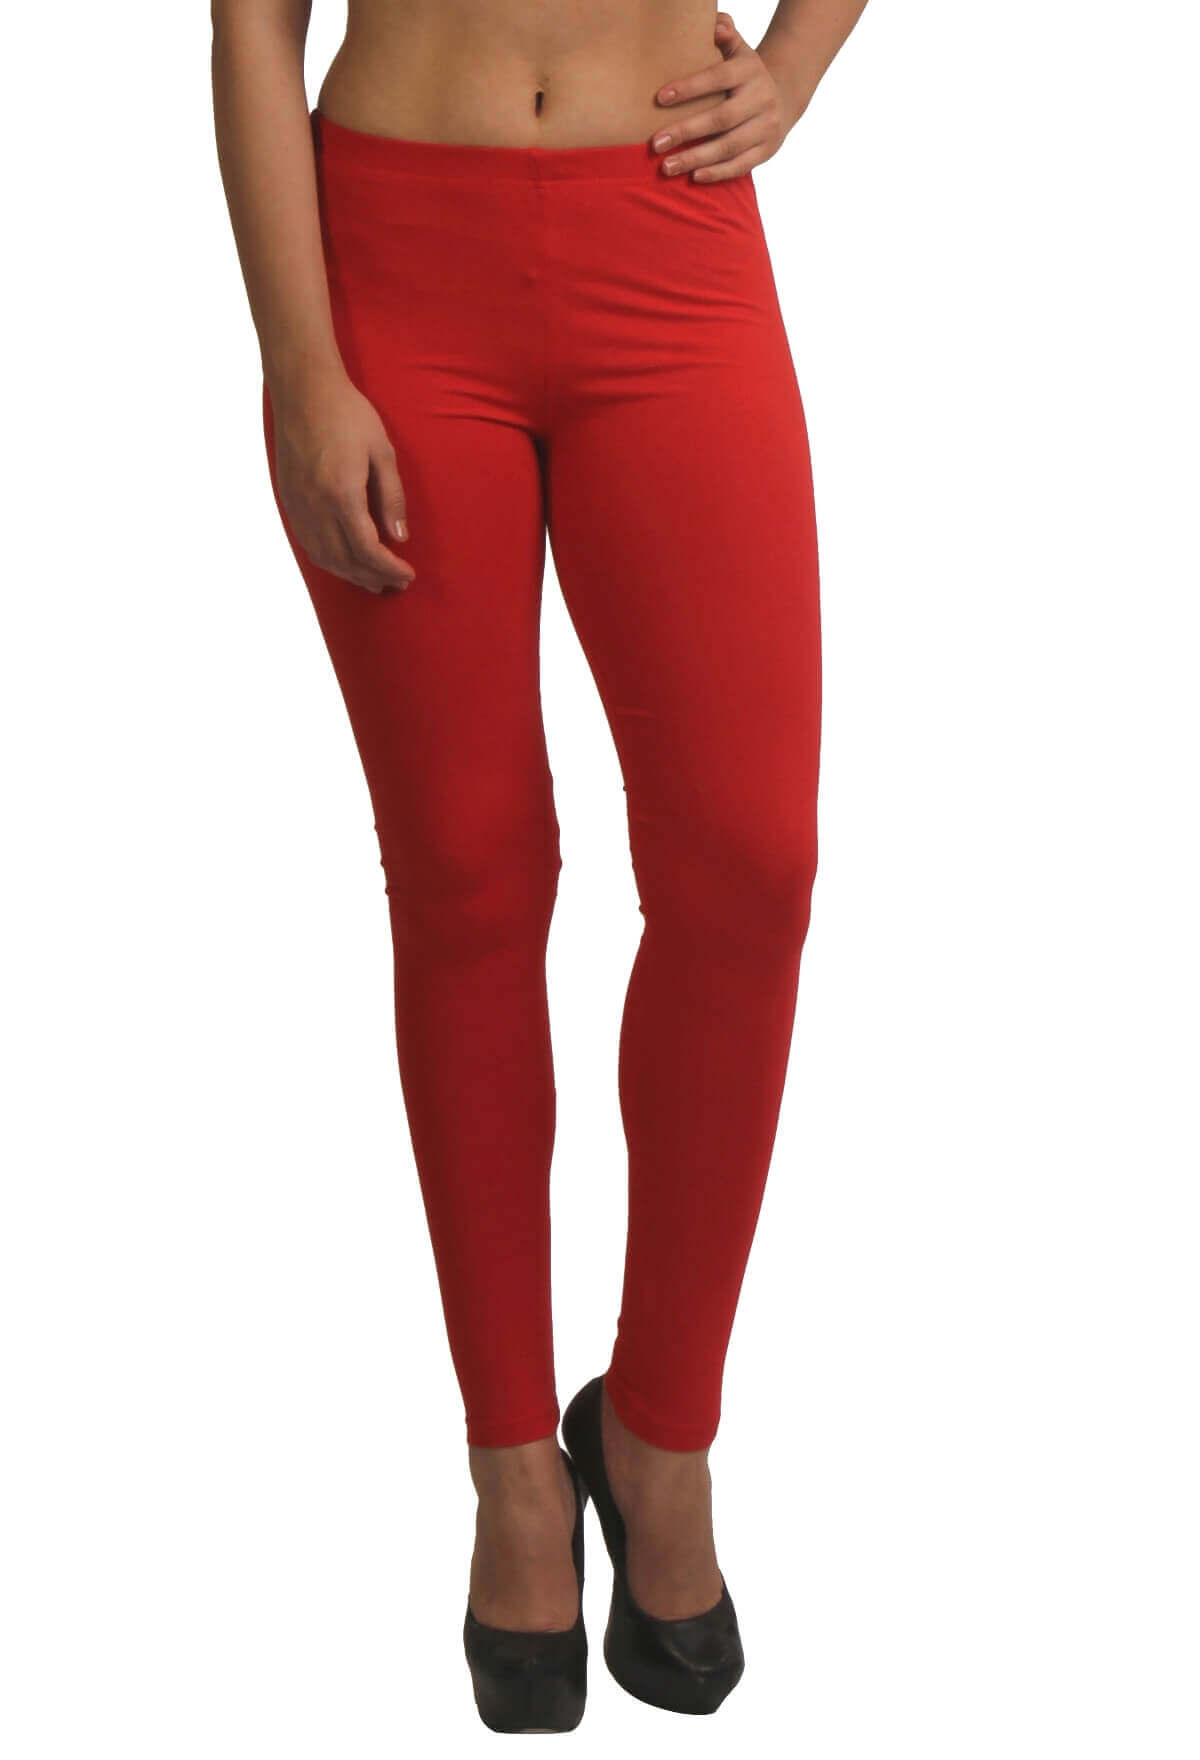 Buy Stylish Spandex Tights Collection At Best Prices Online